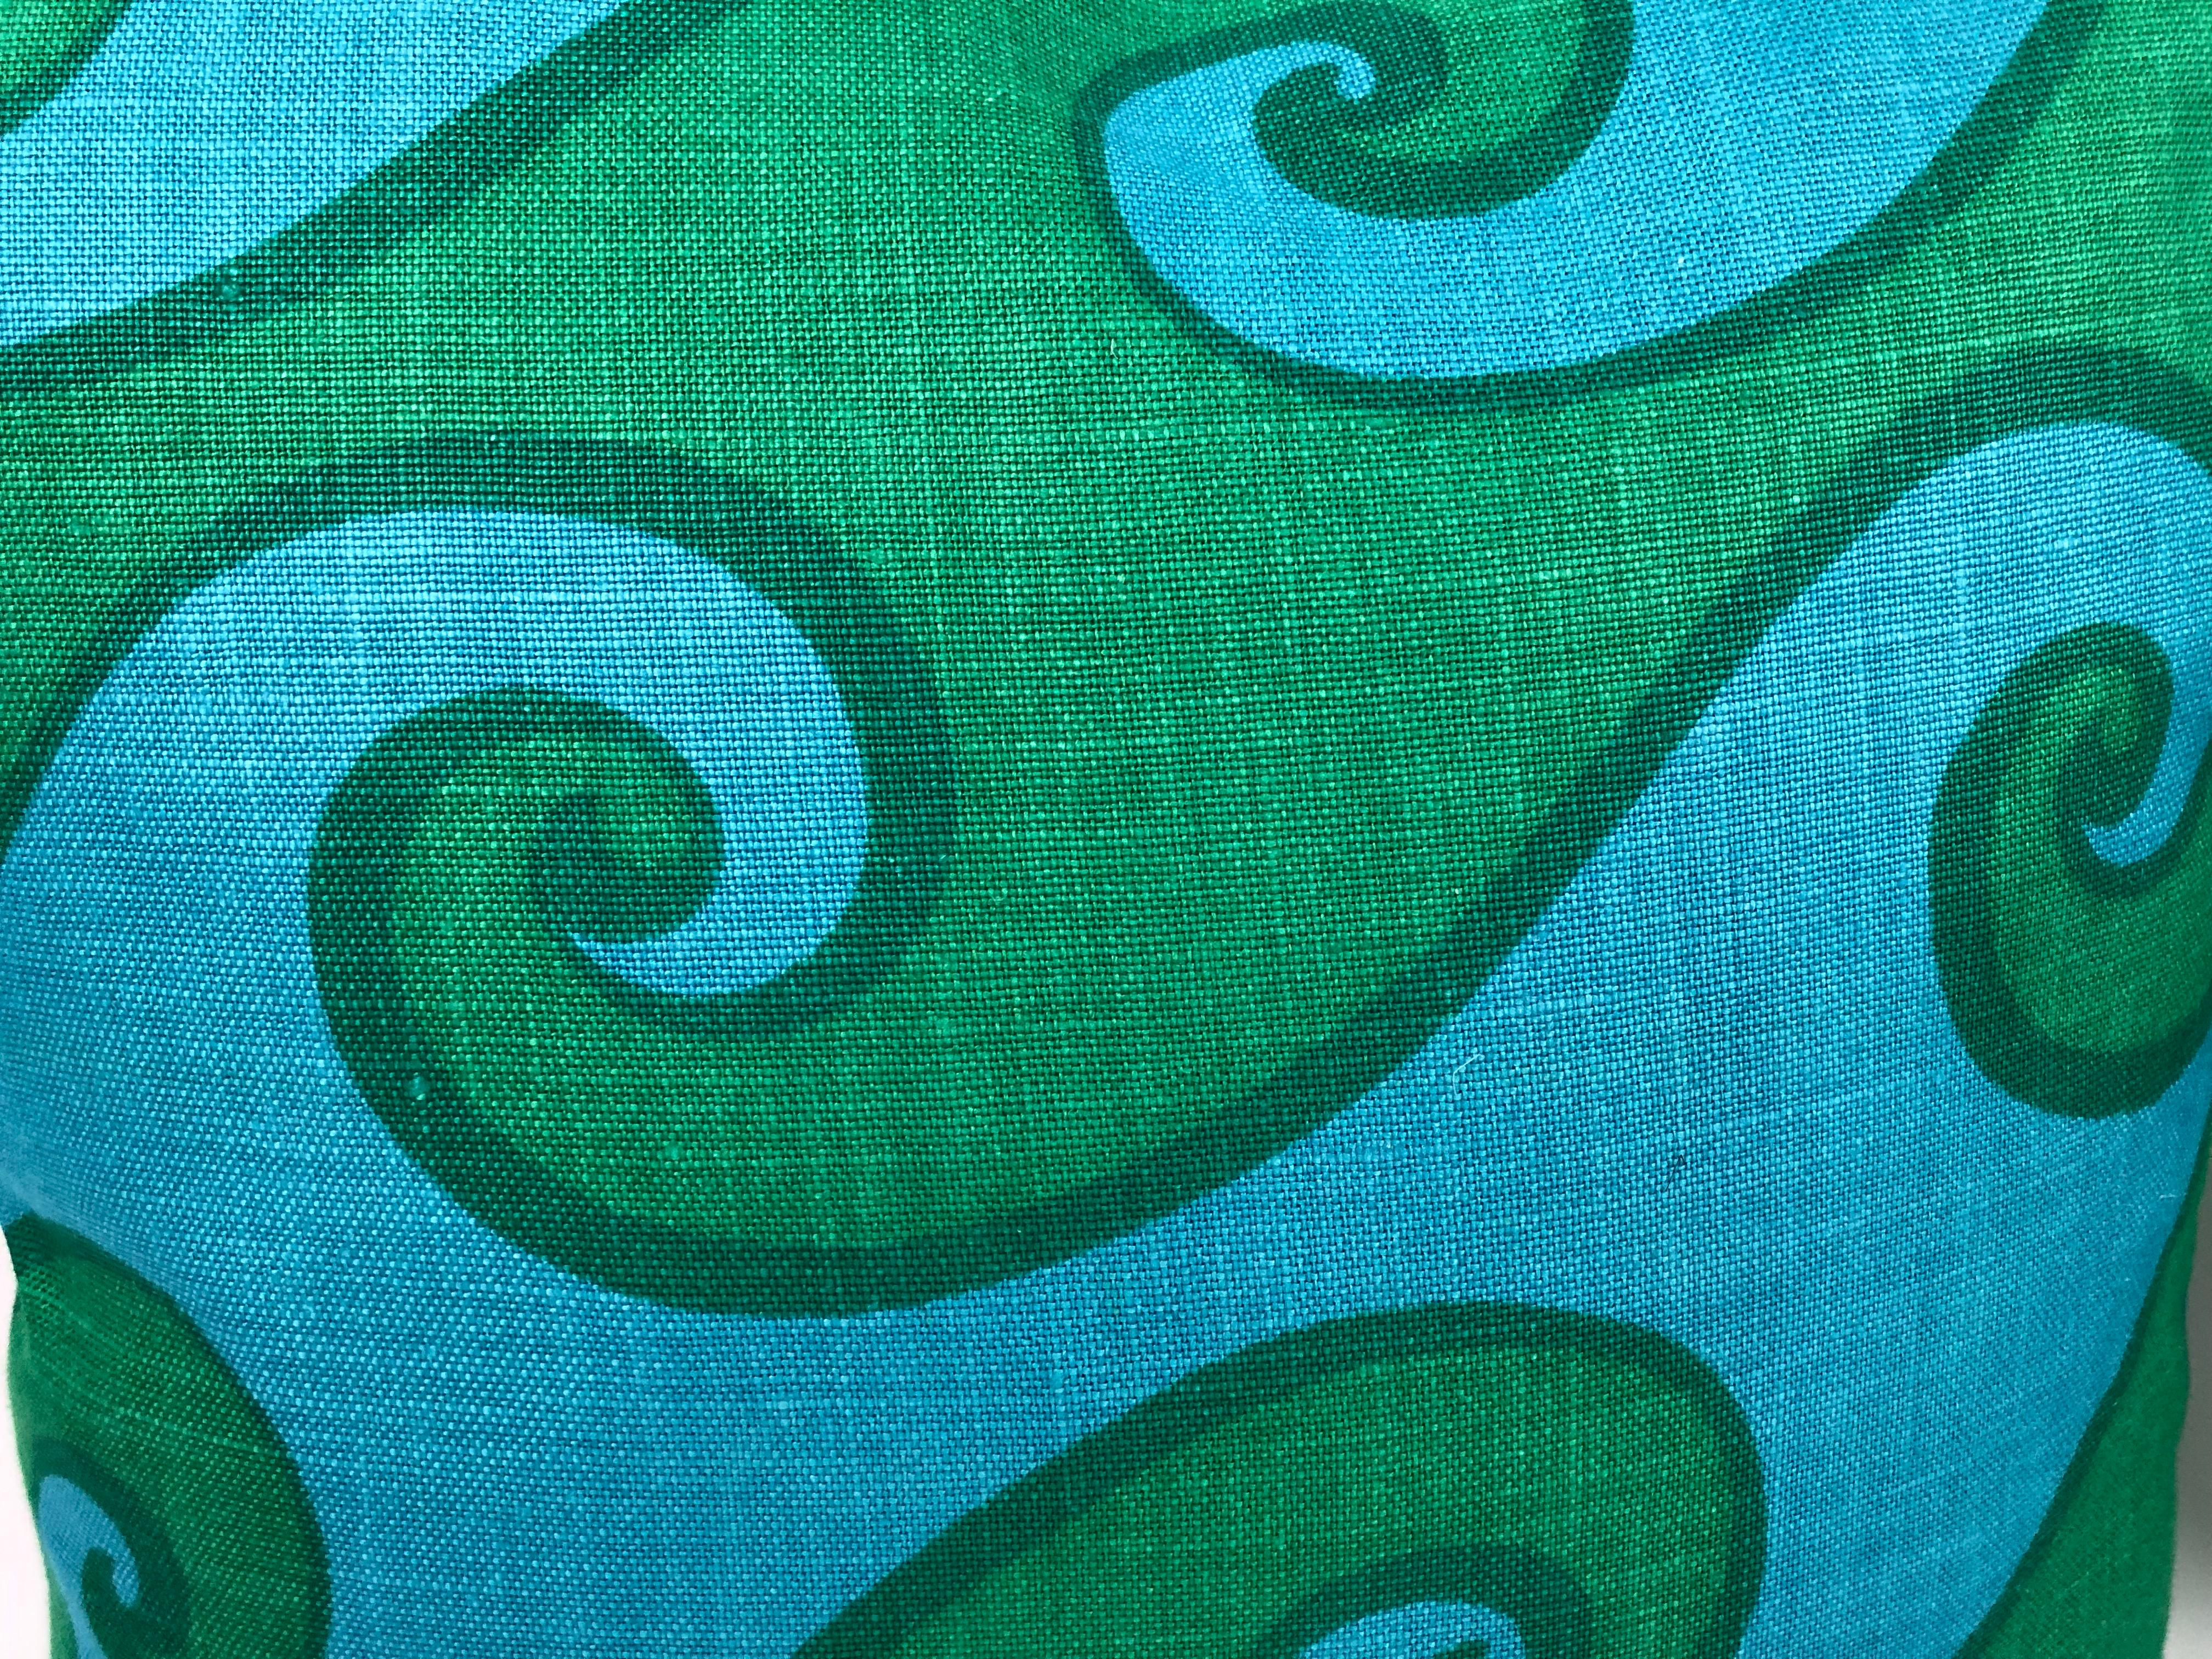 Hand-Crafted Vintage Blue and Green Sea Scroll Pattern Pillow Hand Printed by Elenhank